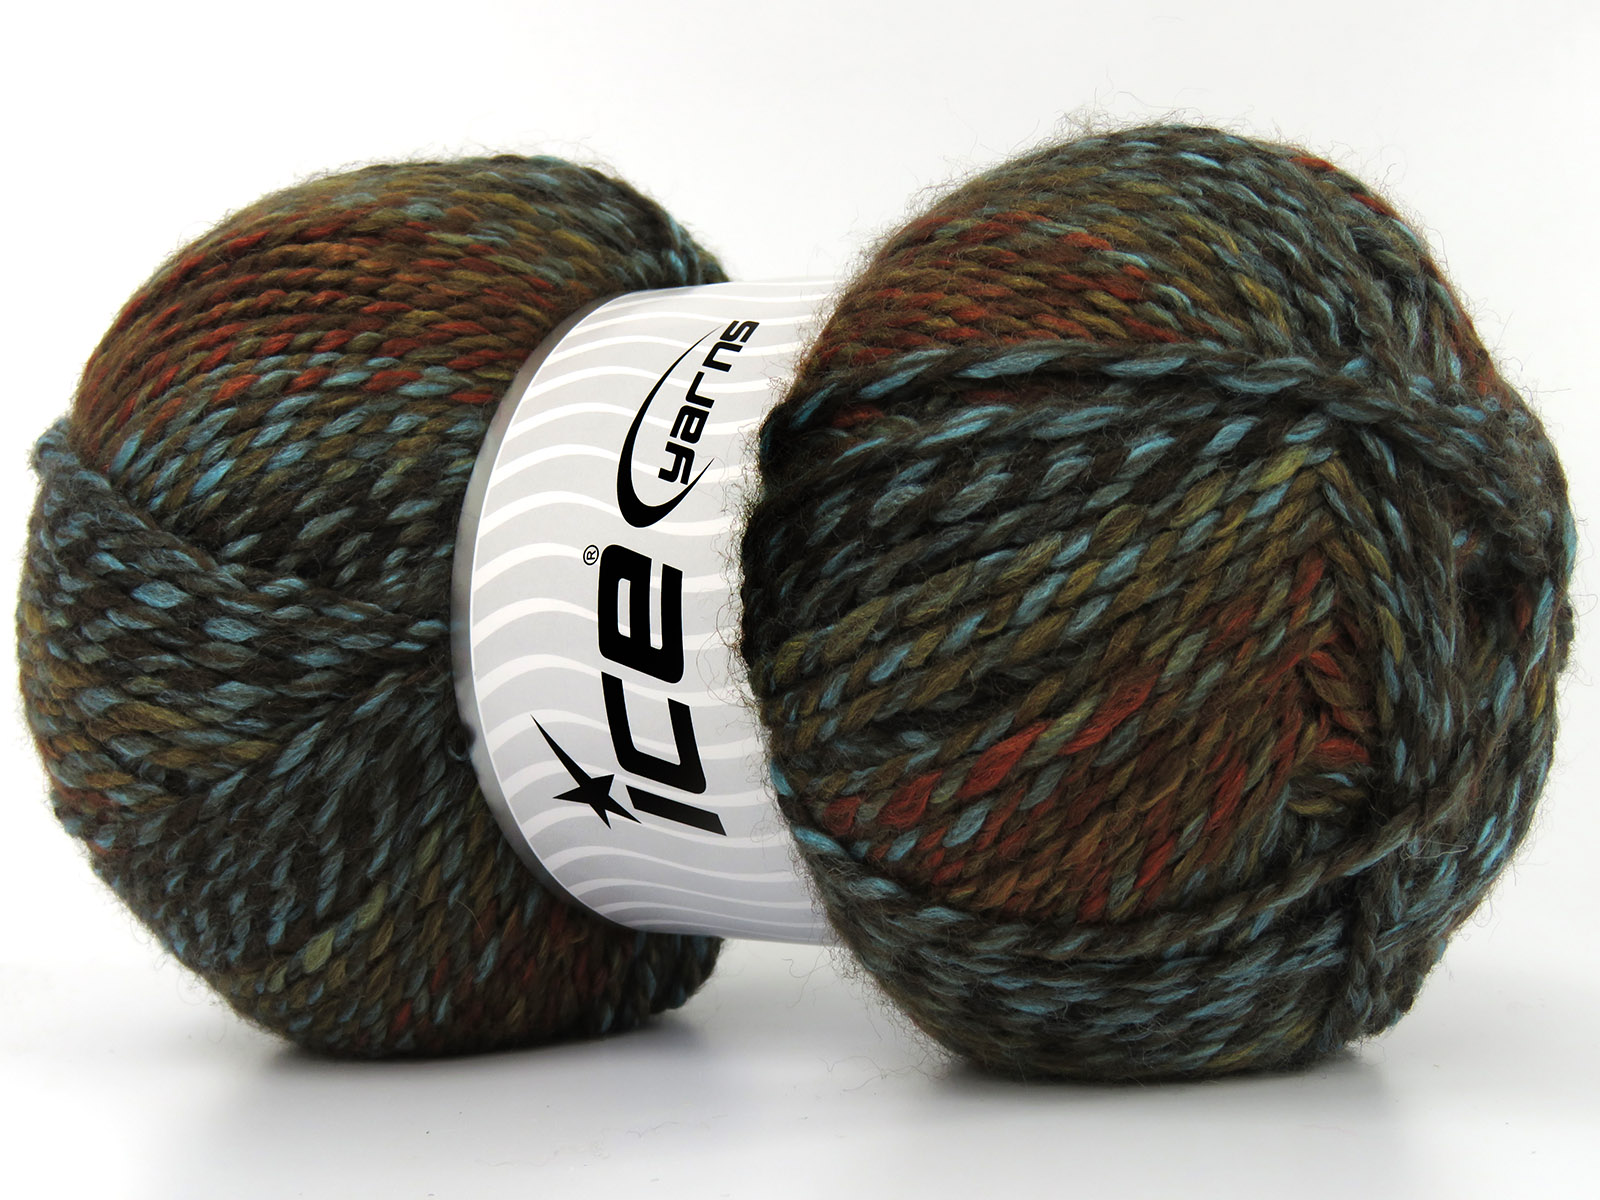 Puzzle Wool Worsted Brown Shades, Turquoise at Ice Yarns Online Yarn Store